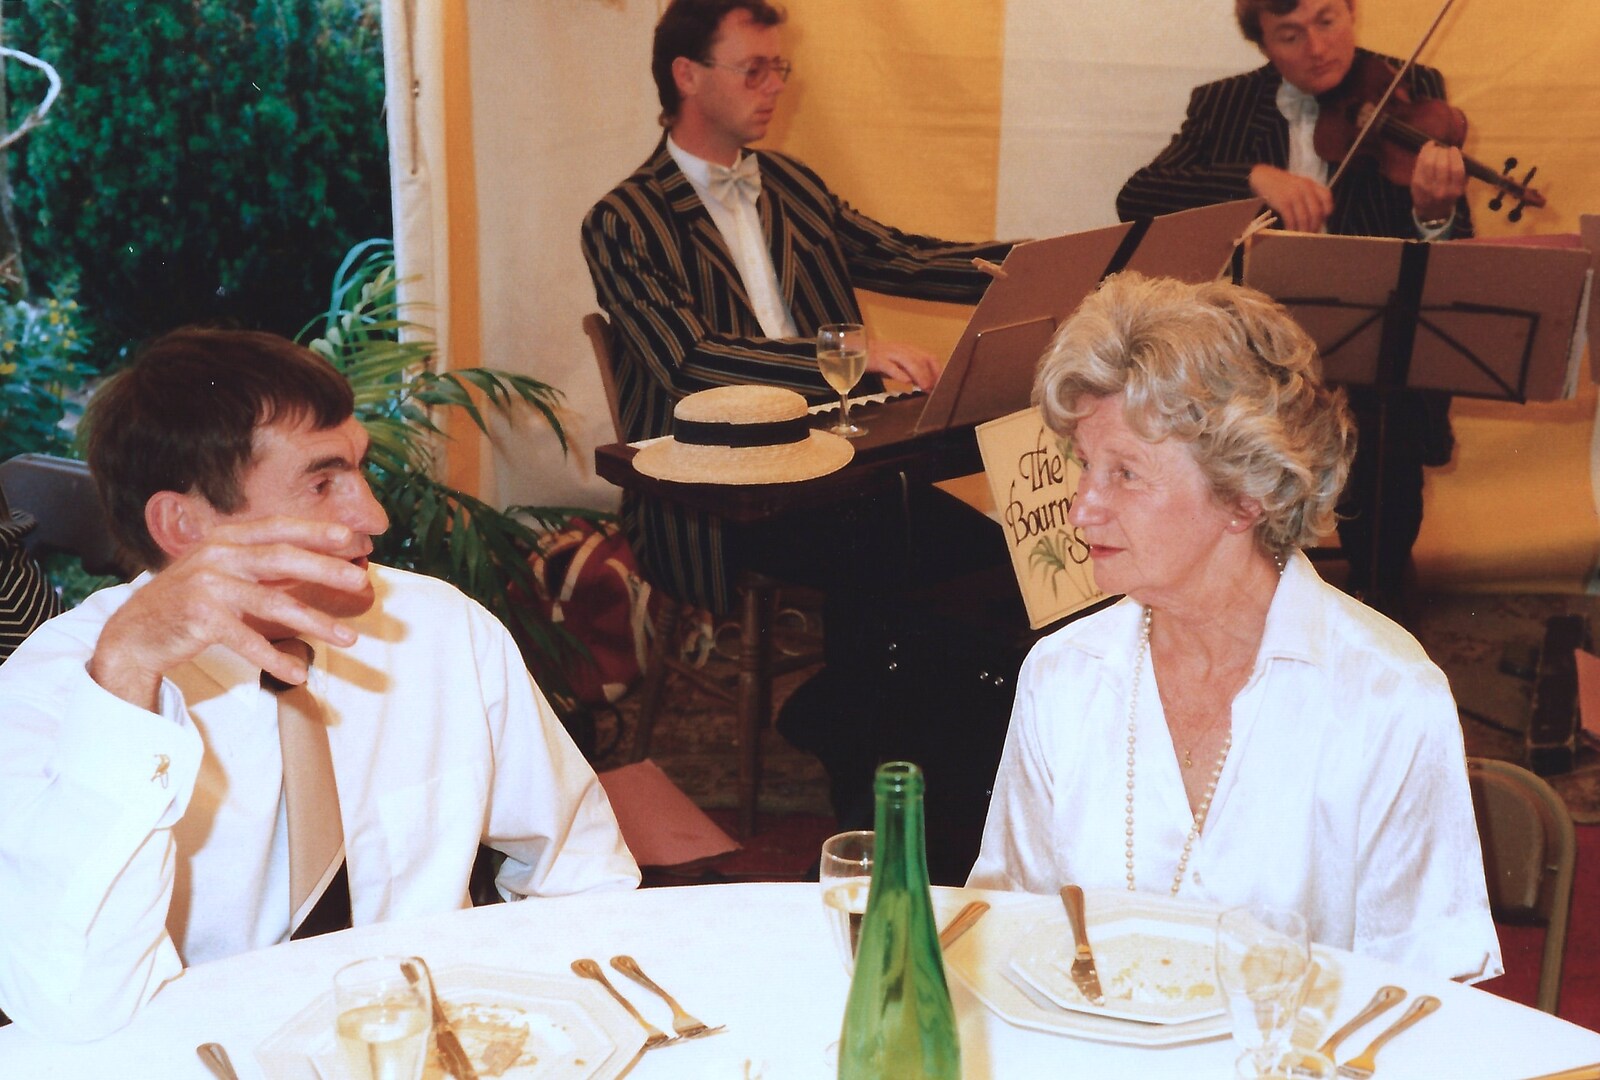 Grandmother and Mike's brother from Mother and Mike's Wedding Reception, Bransgore, Dorset - 20th August 1988